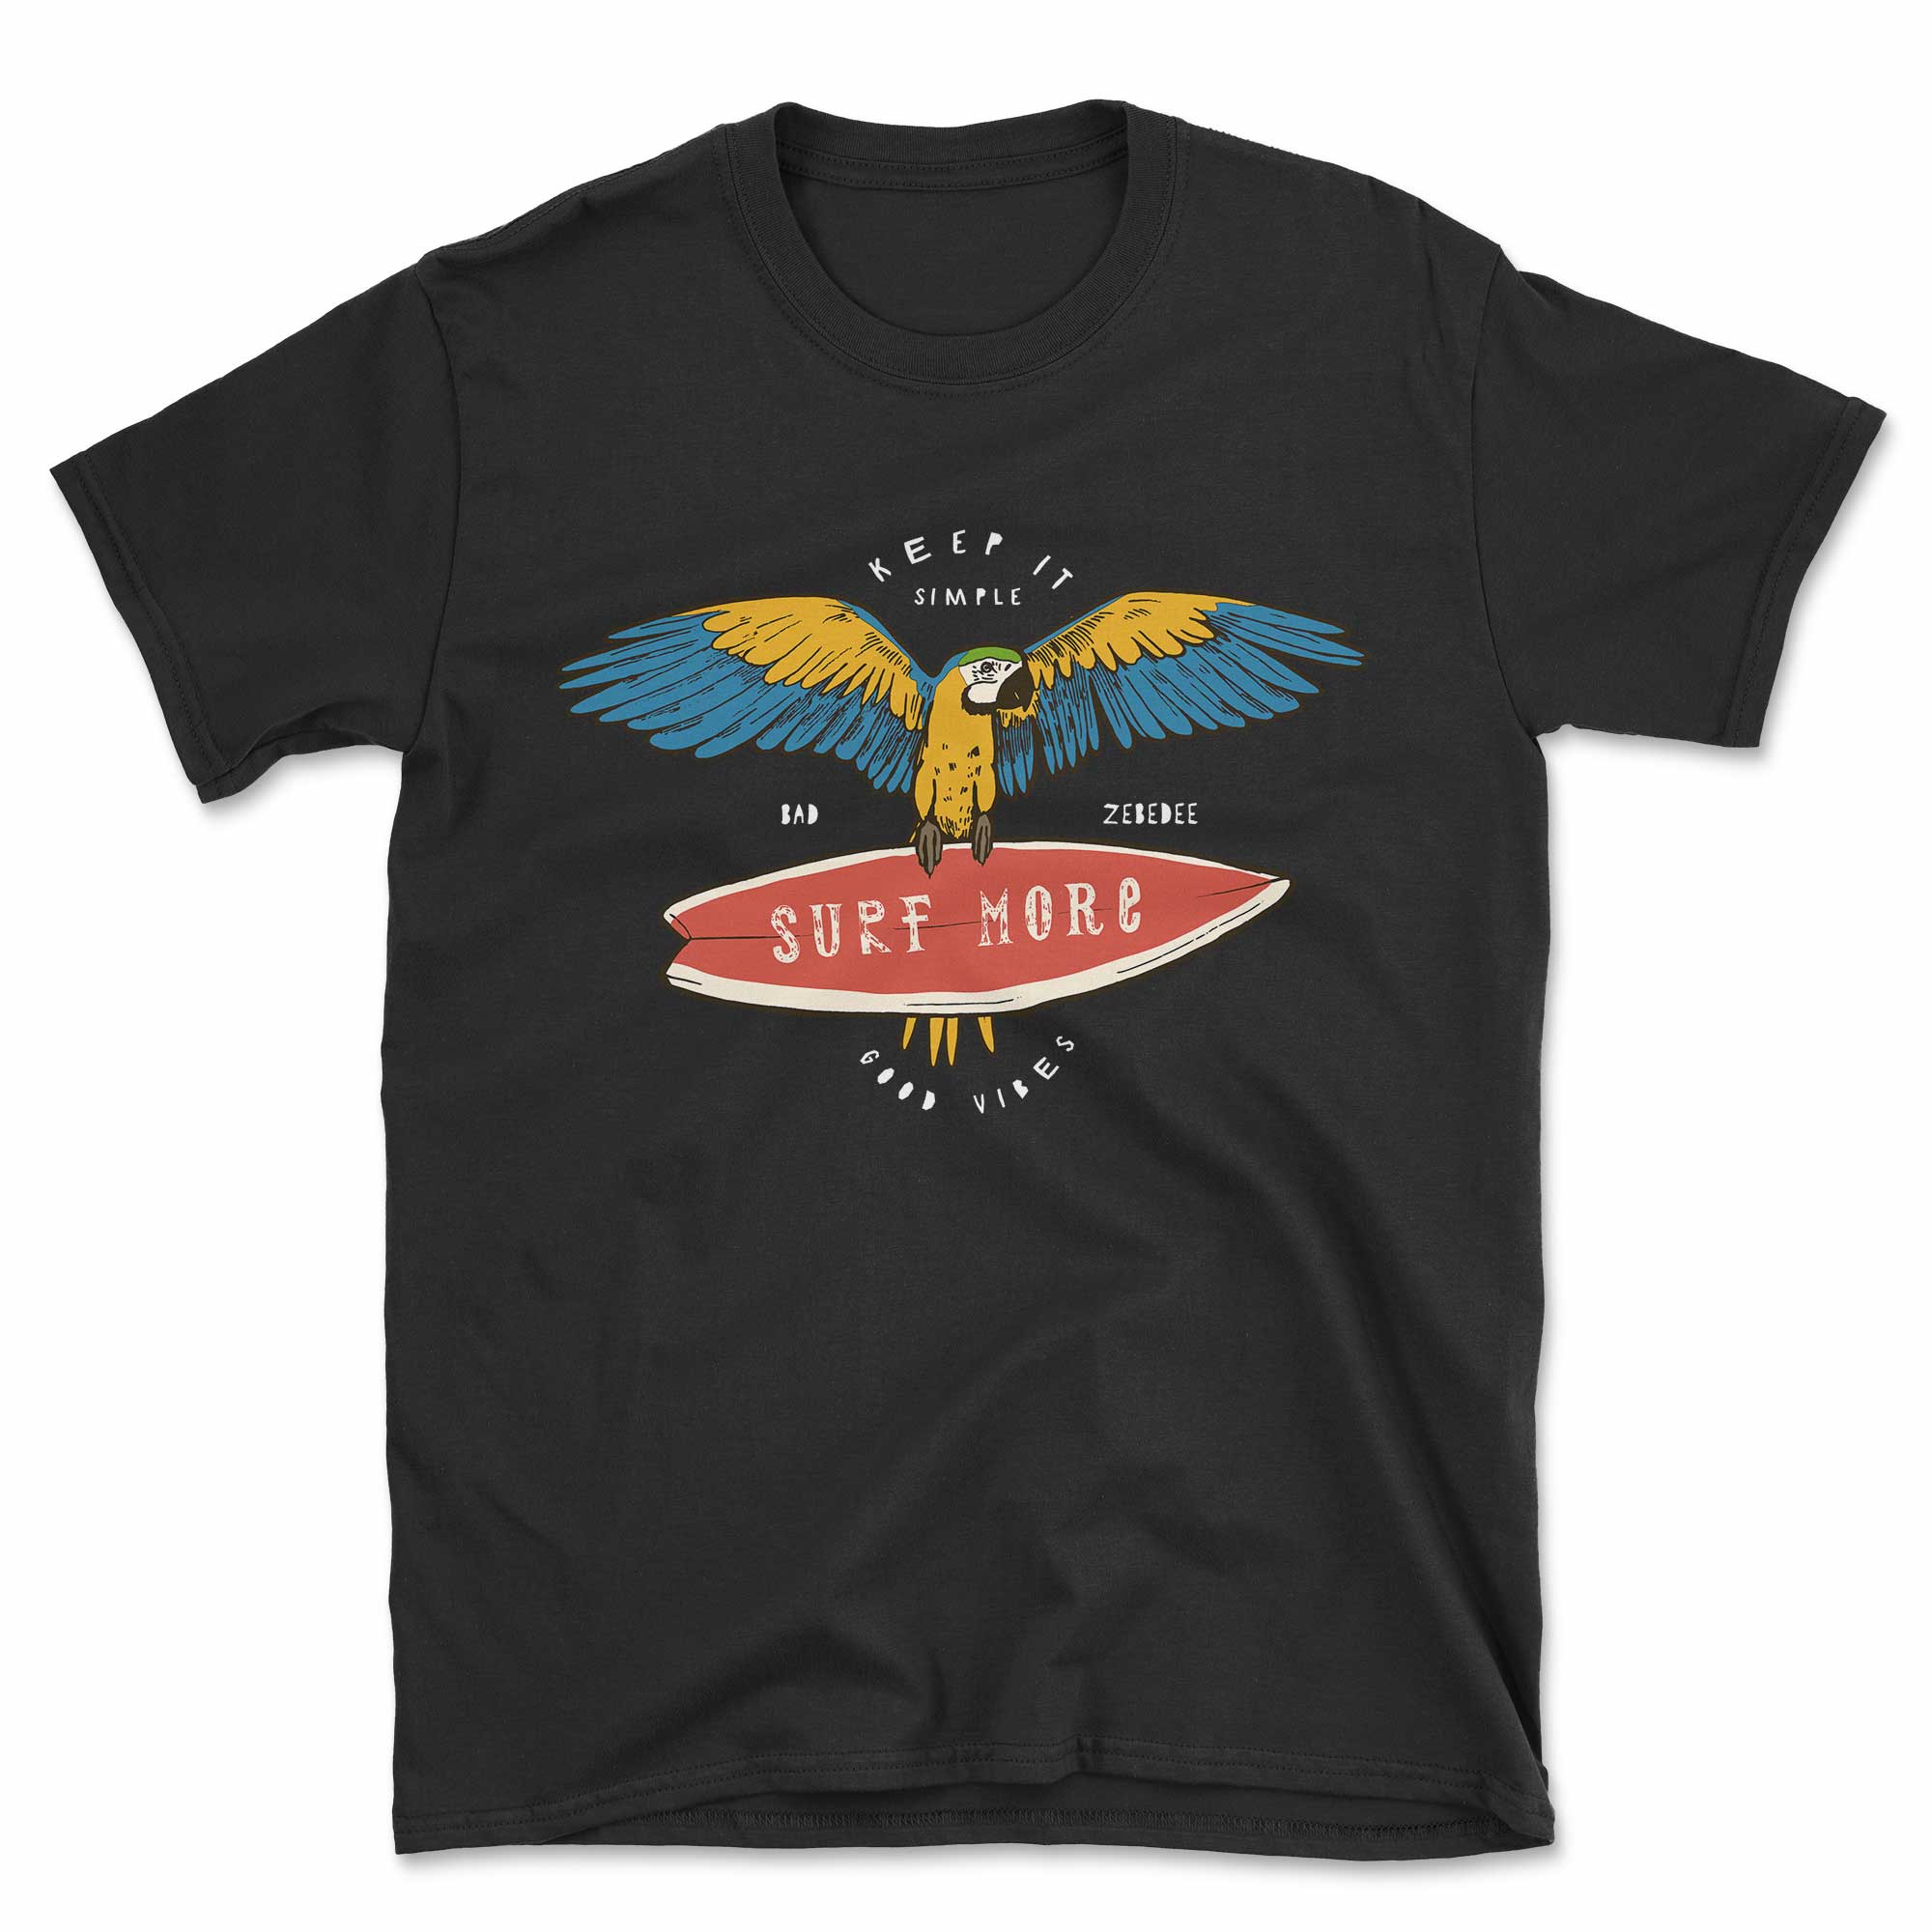 Keep It Simple Surf More T-Shirt